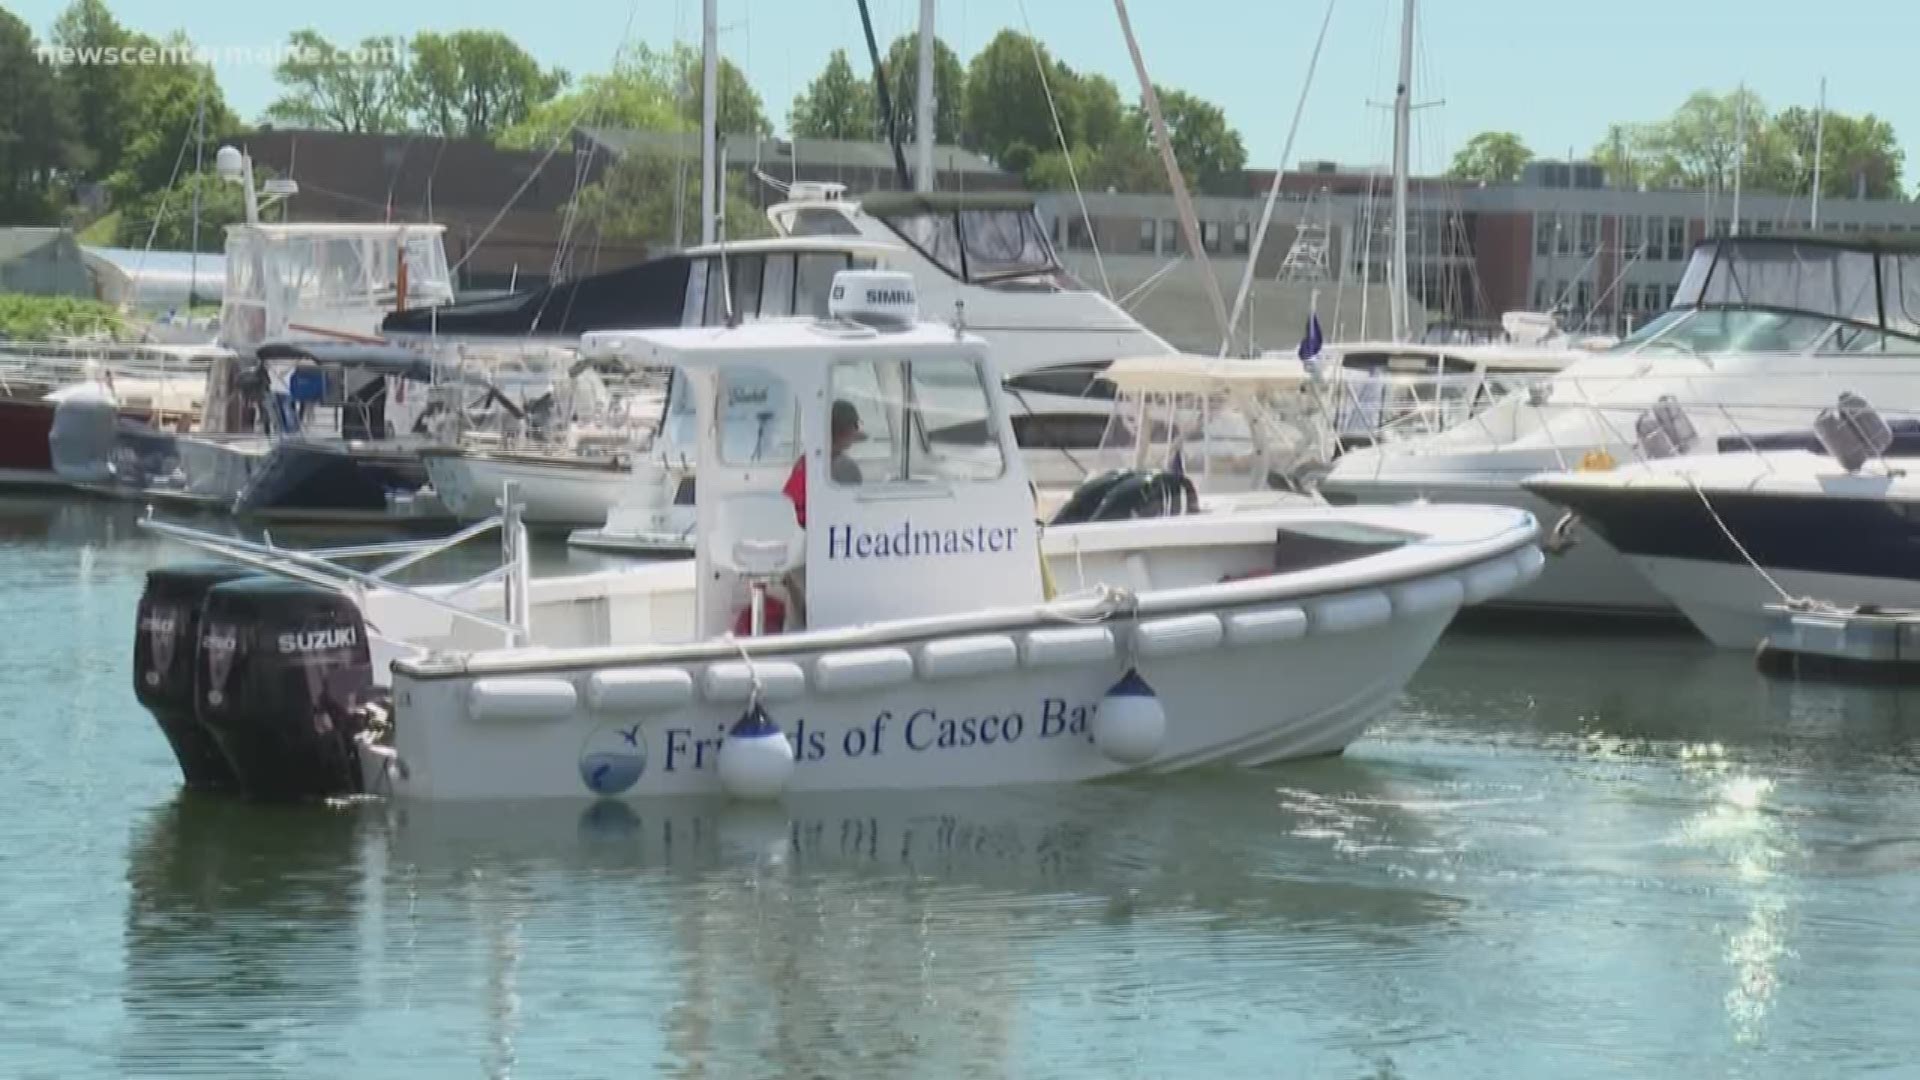 New pump-out boat 'Headmaster' in Casco Bay is helping to get rid of waste in the water.